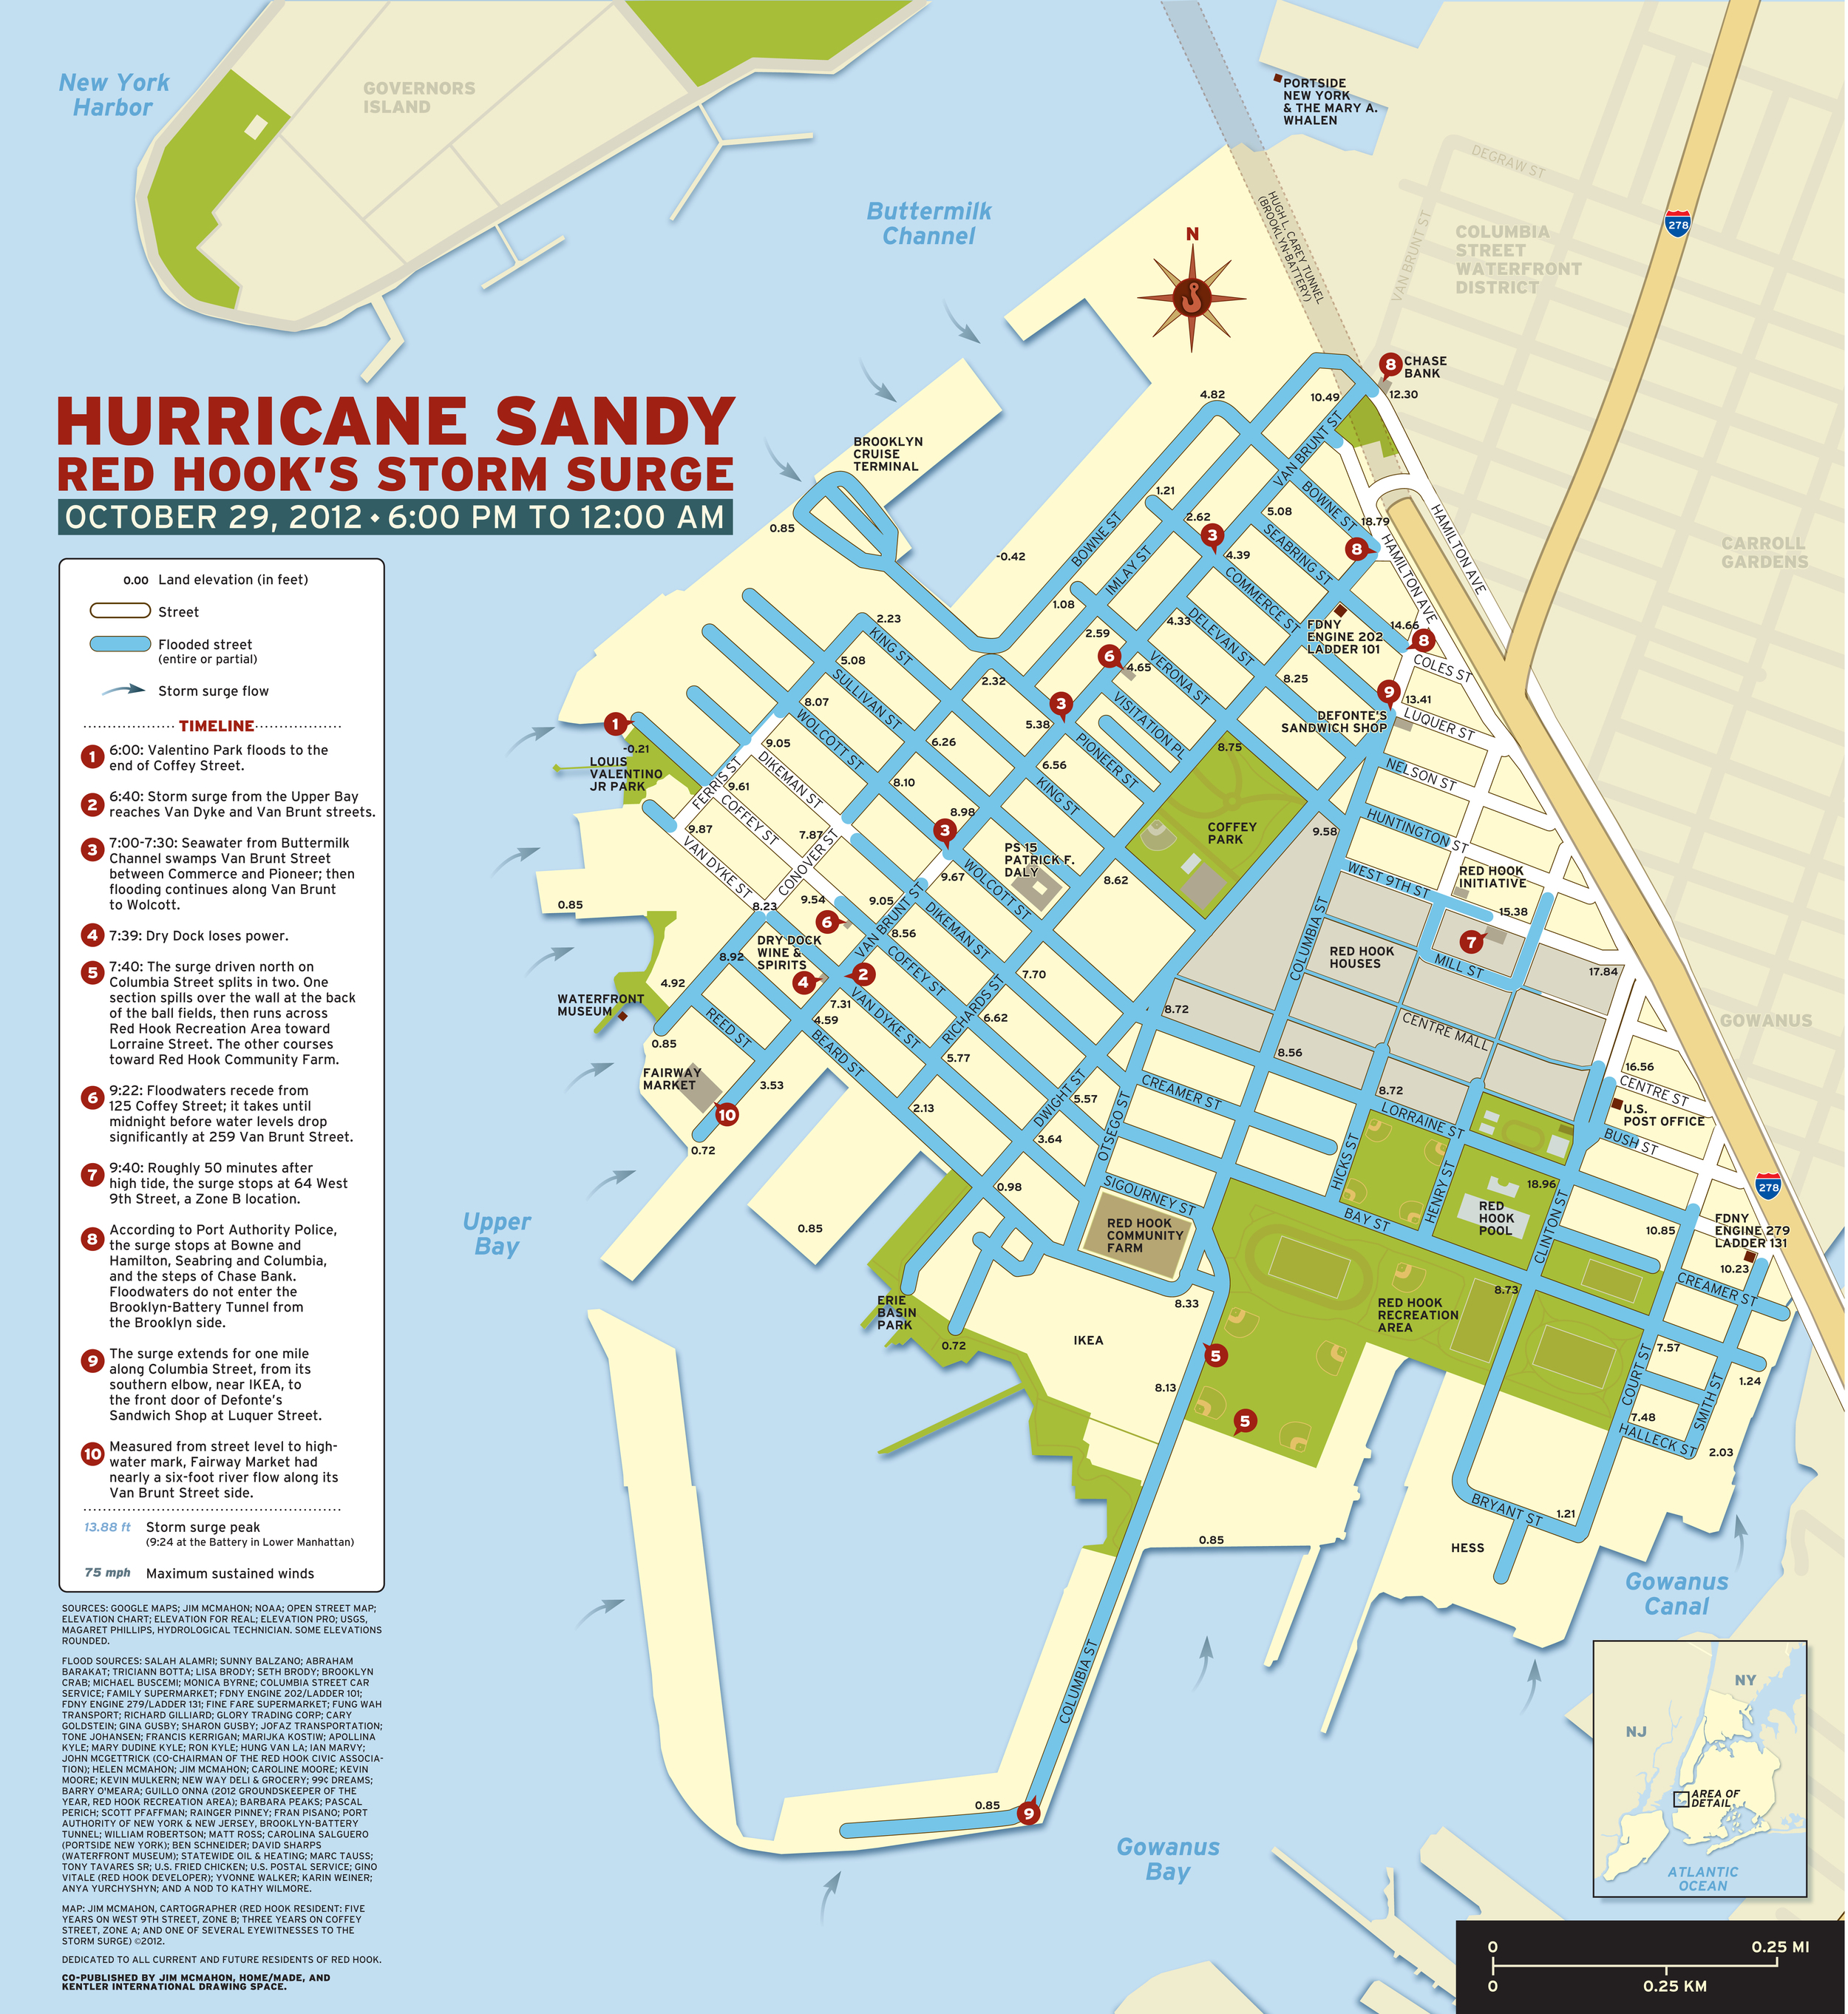 Red Hook Sandy Surge Map & How to Assess Future Flood Risk